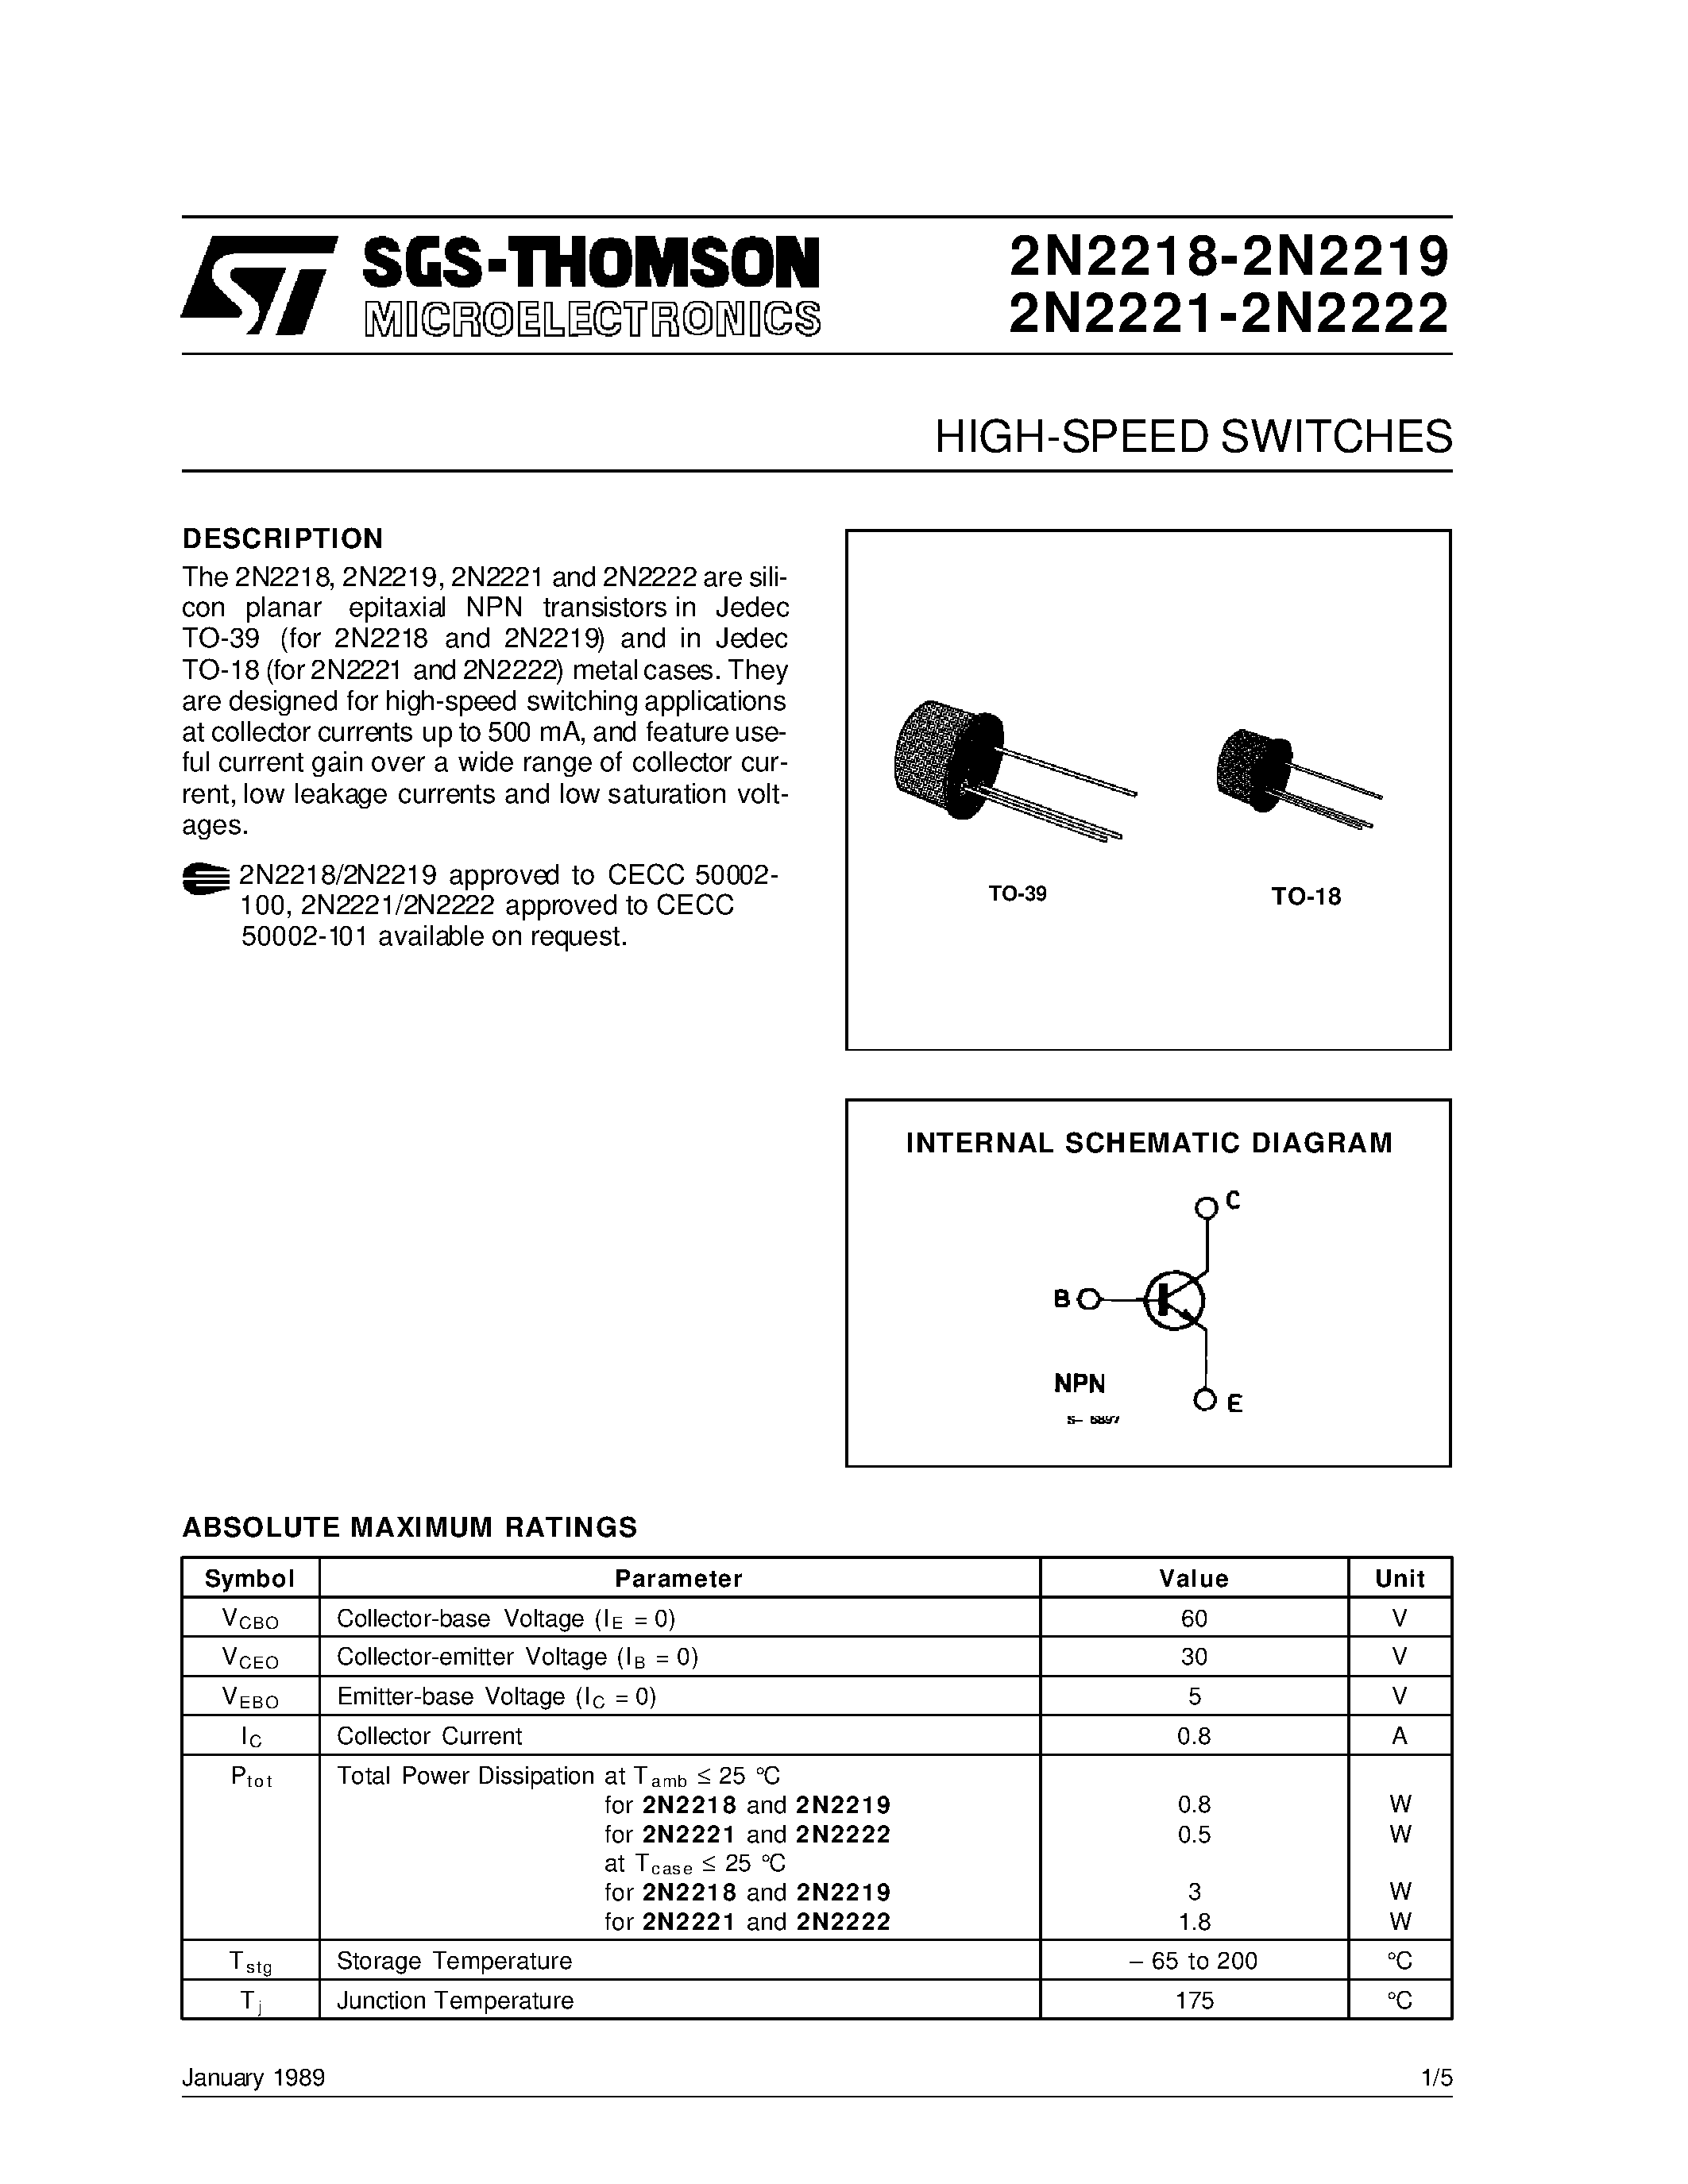 Datasheet 2N2221 - HIGH-SPEED SWITCHES page 1